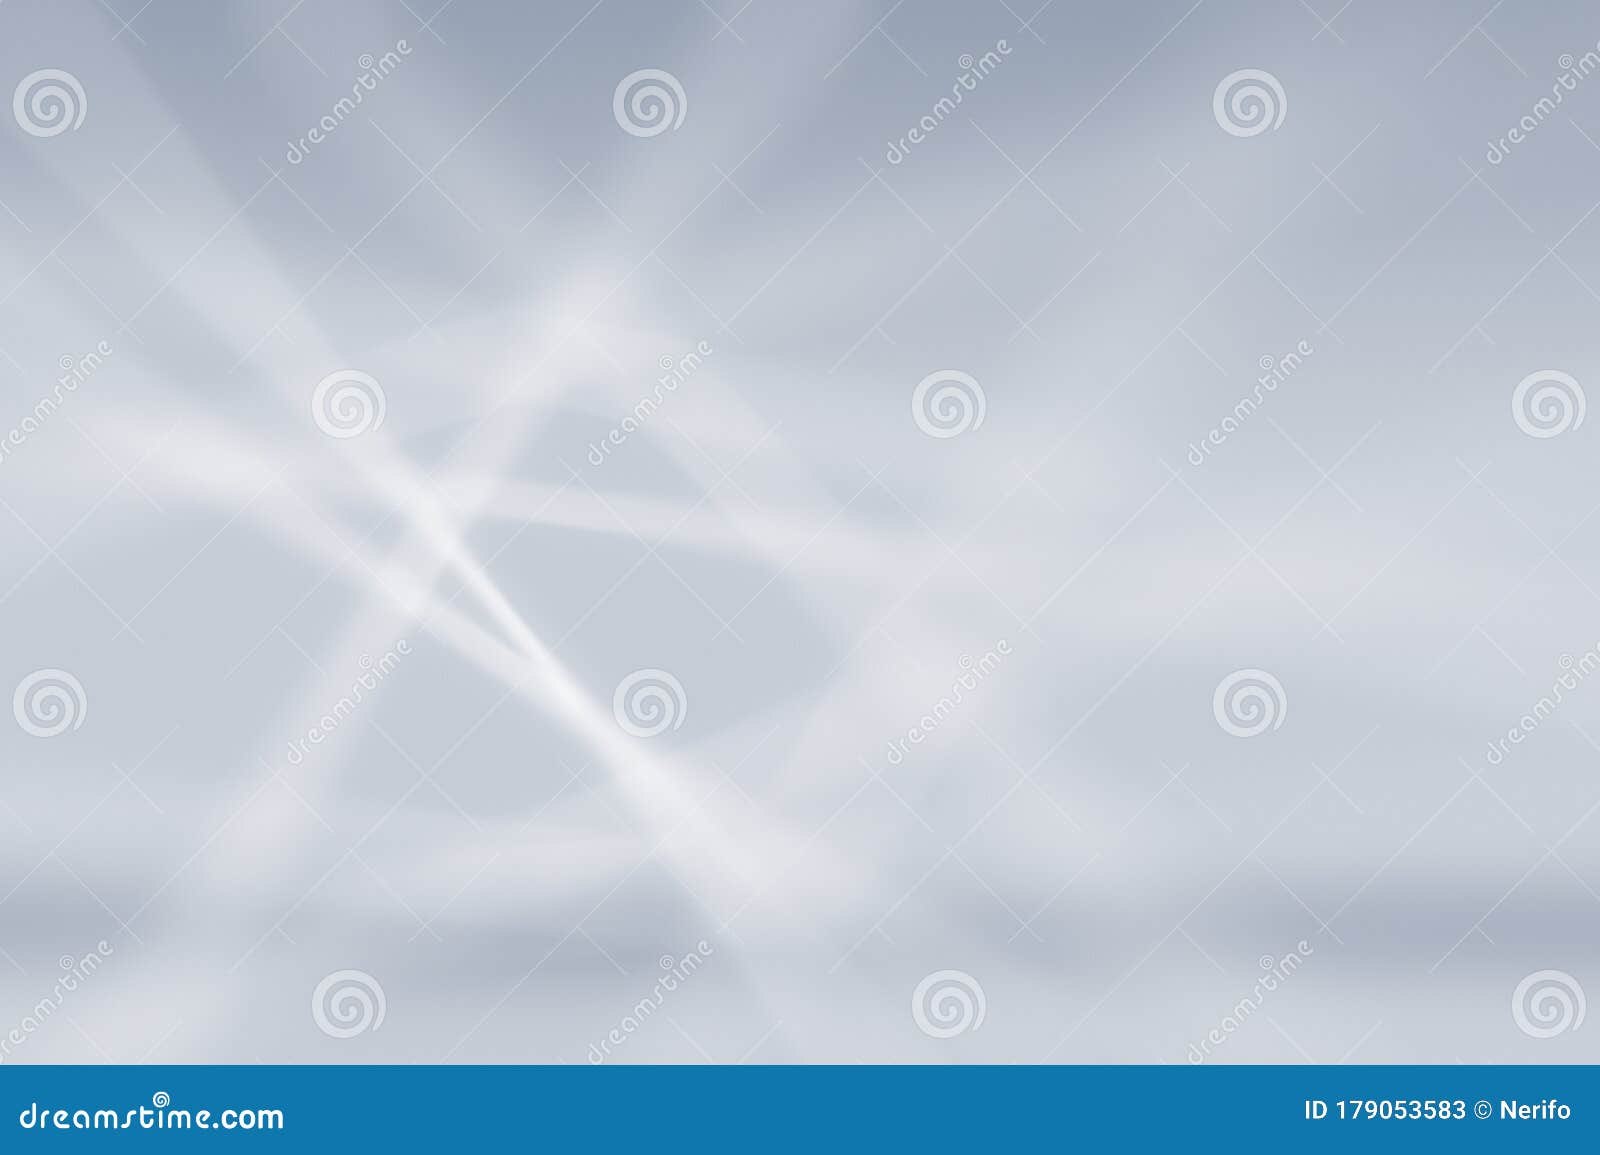 abstract blurry silver gradient background with spinning light beams